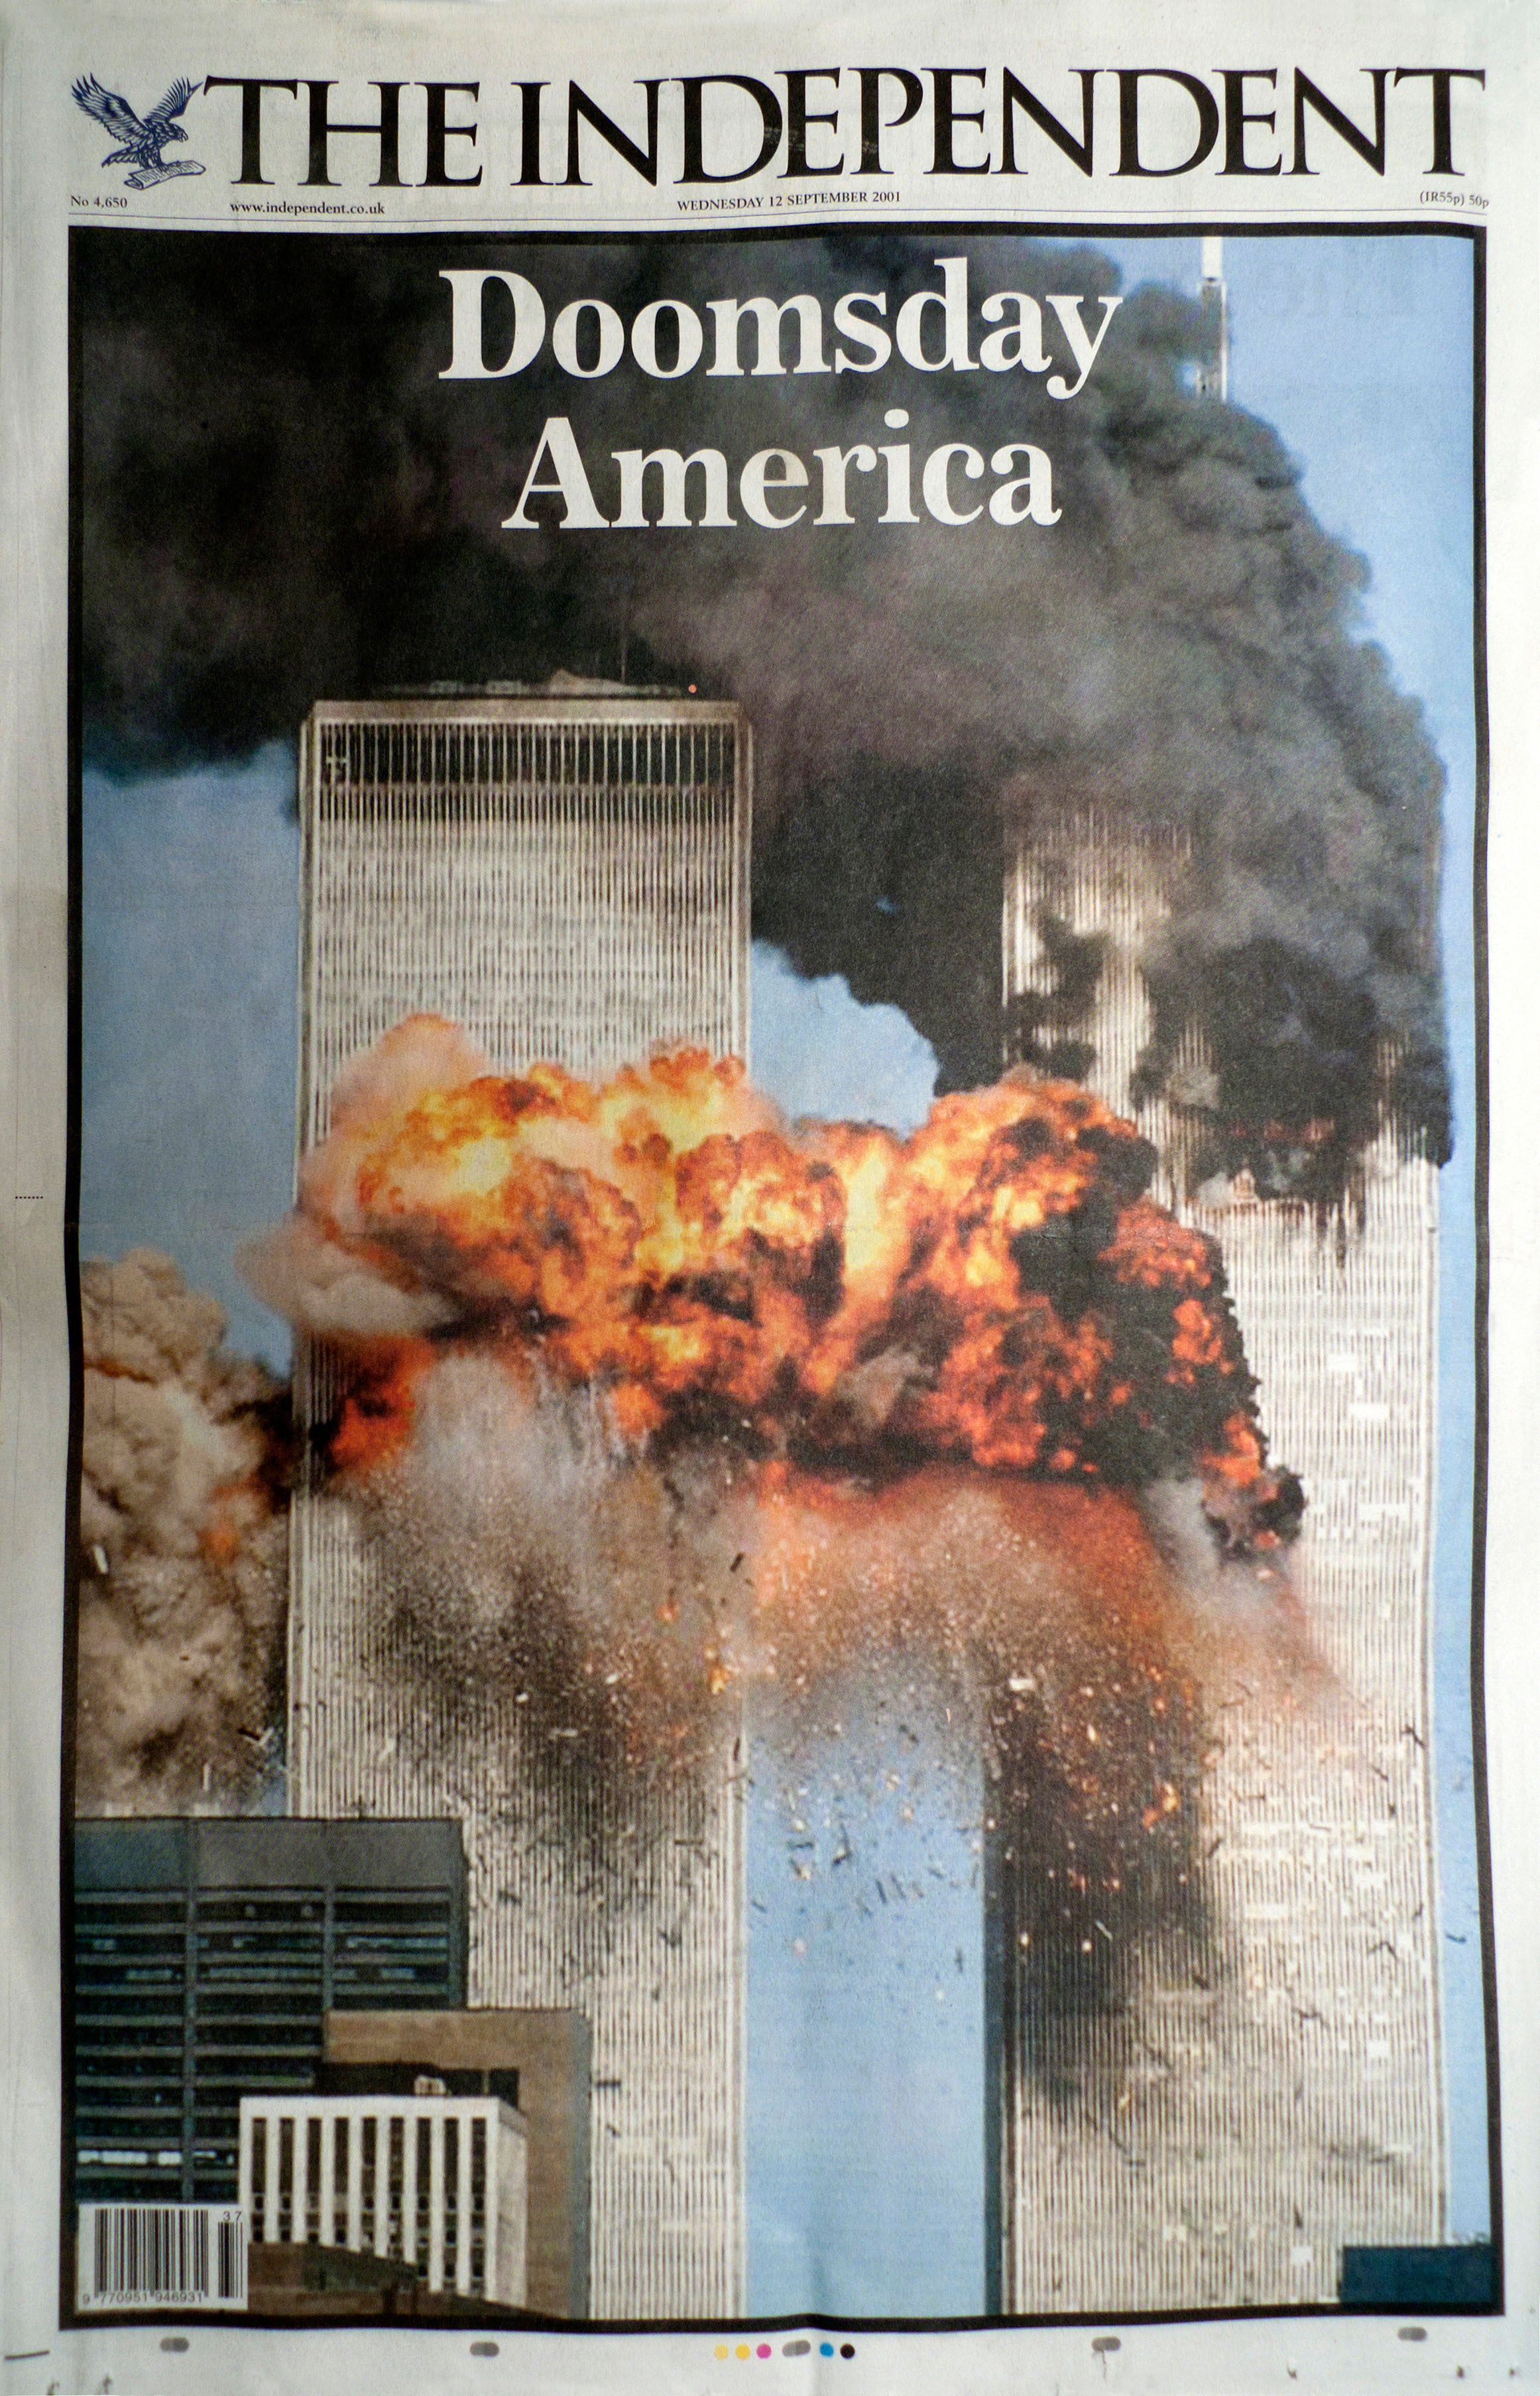 9/11 Front Pages: World Newspapers Coverage 22 Years Ago - Worldcrunch